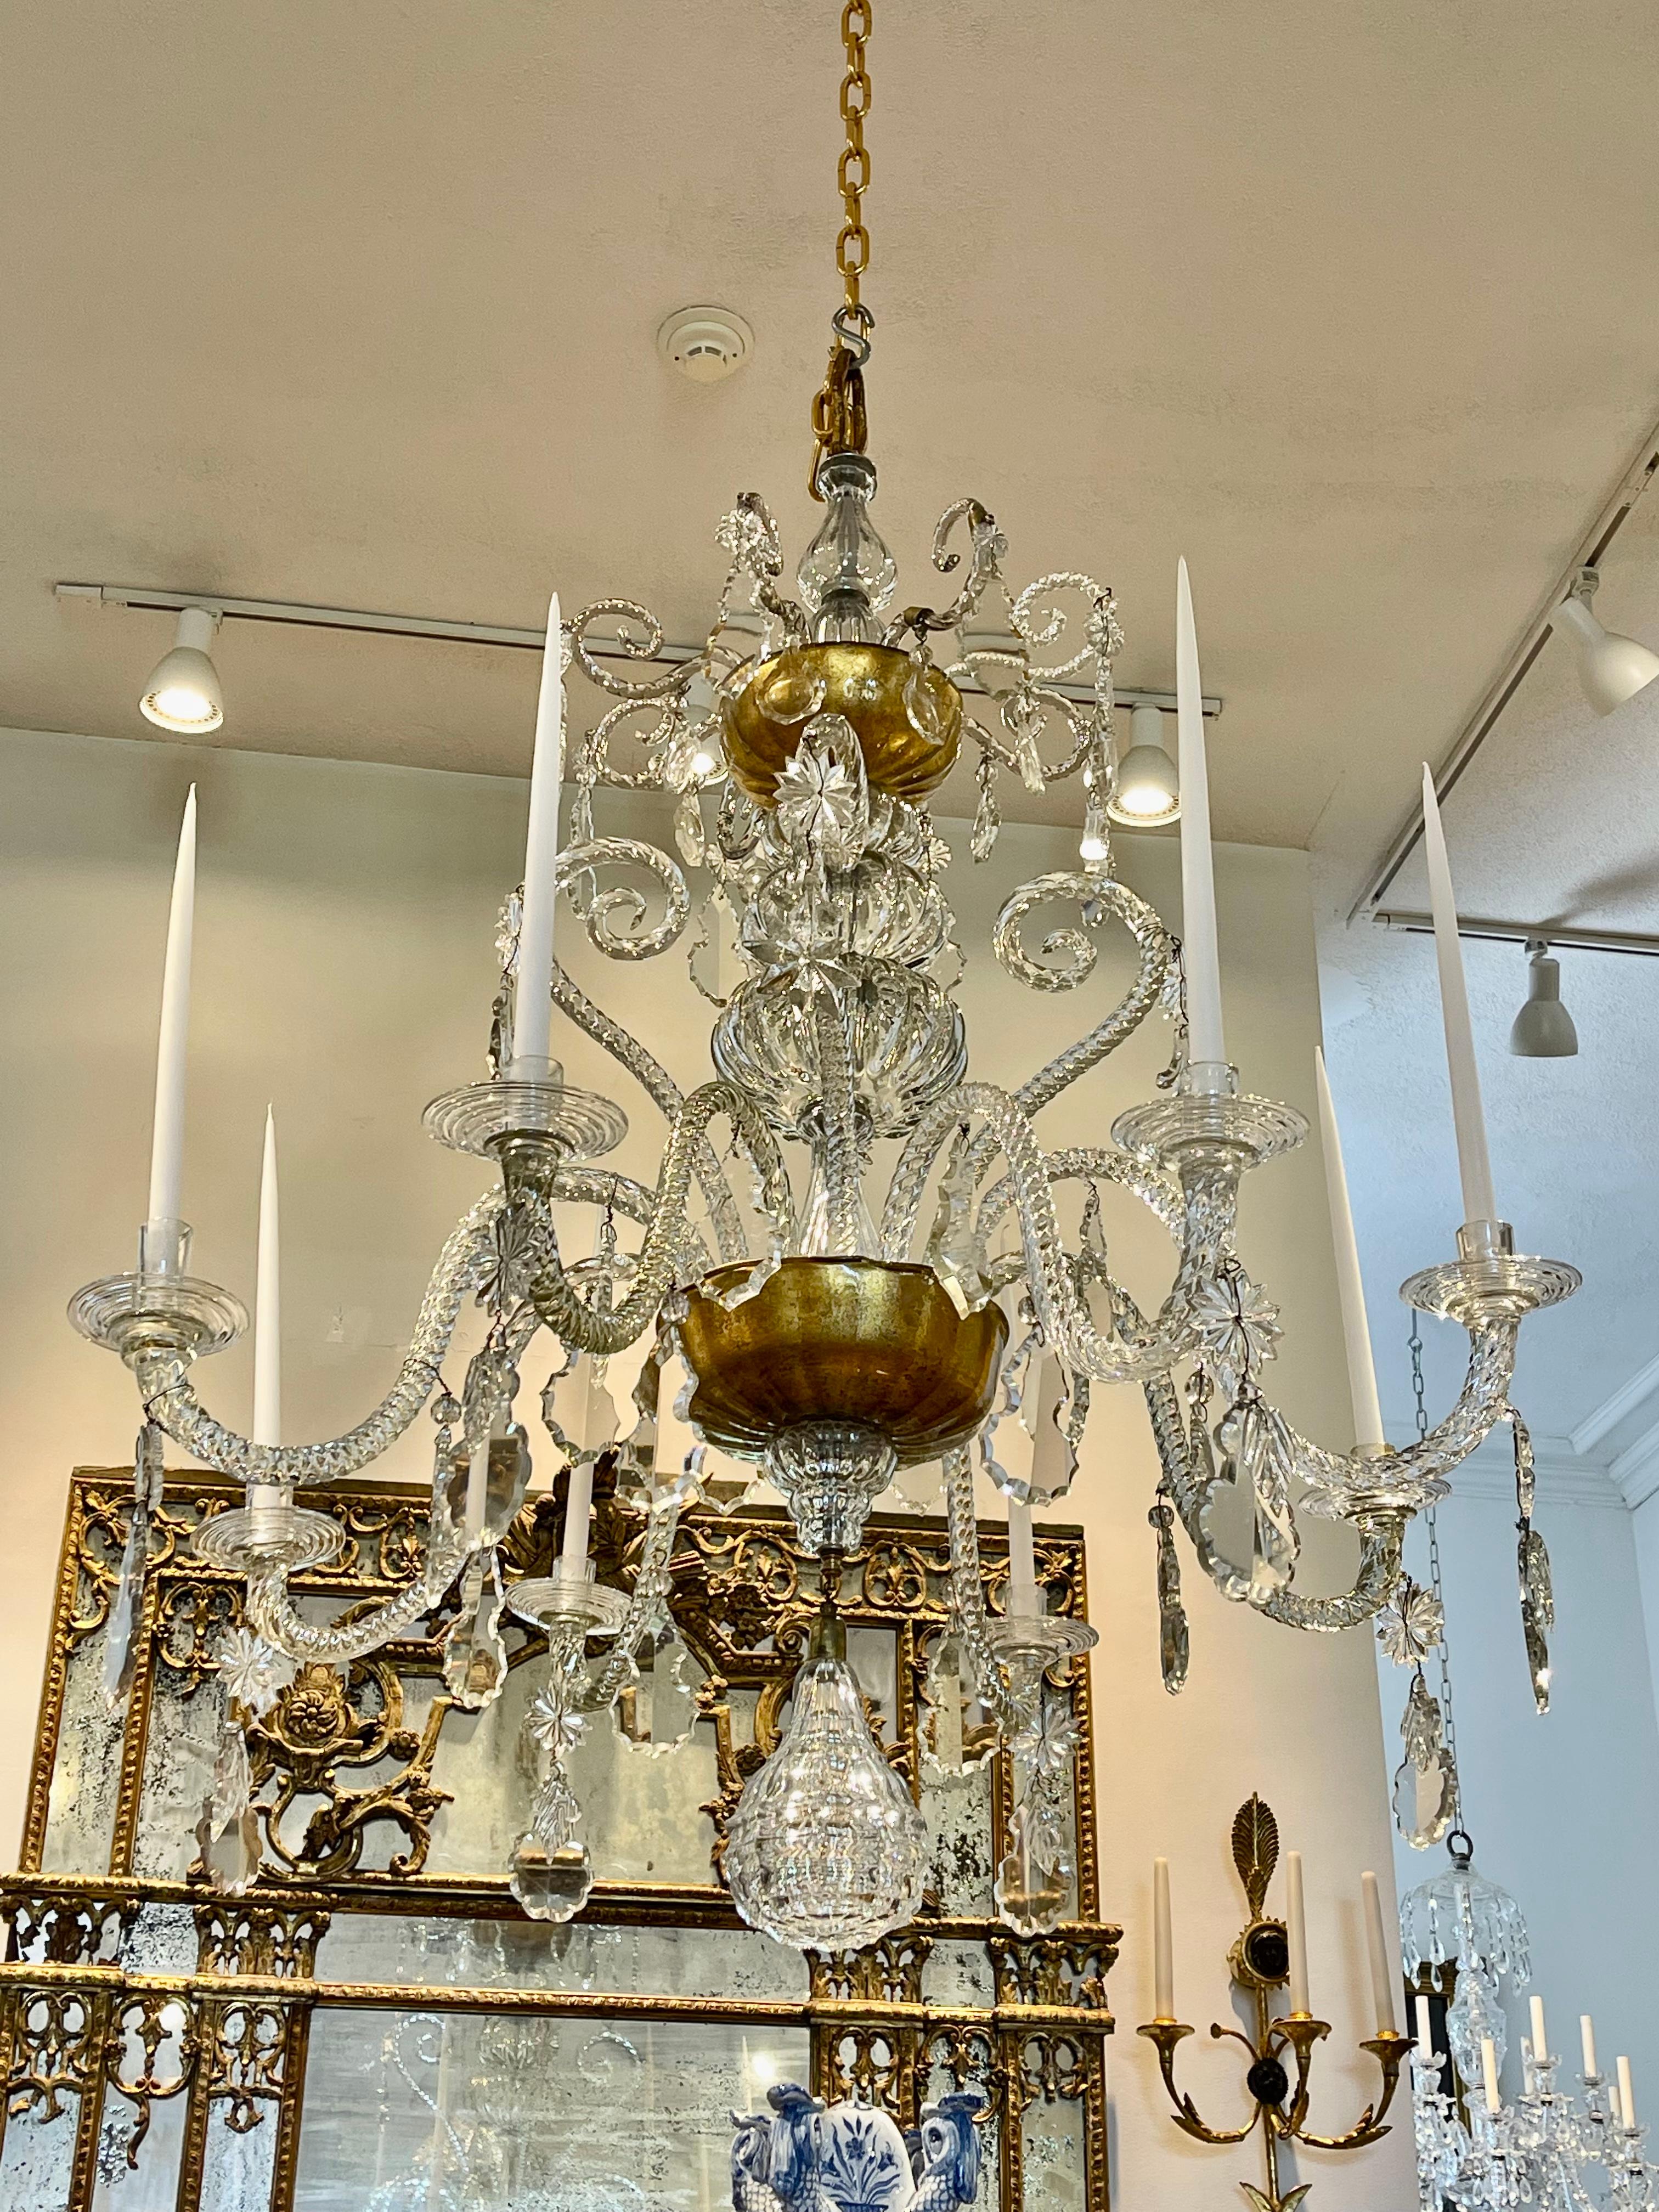 18th century Italian chandelier. All original elements. 8 light. Hand blown throughout. Large size. Impressive.

Candle now but can be French wired at client's request

Provenance: Michael Smith.